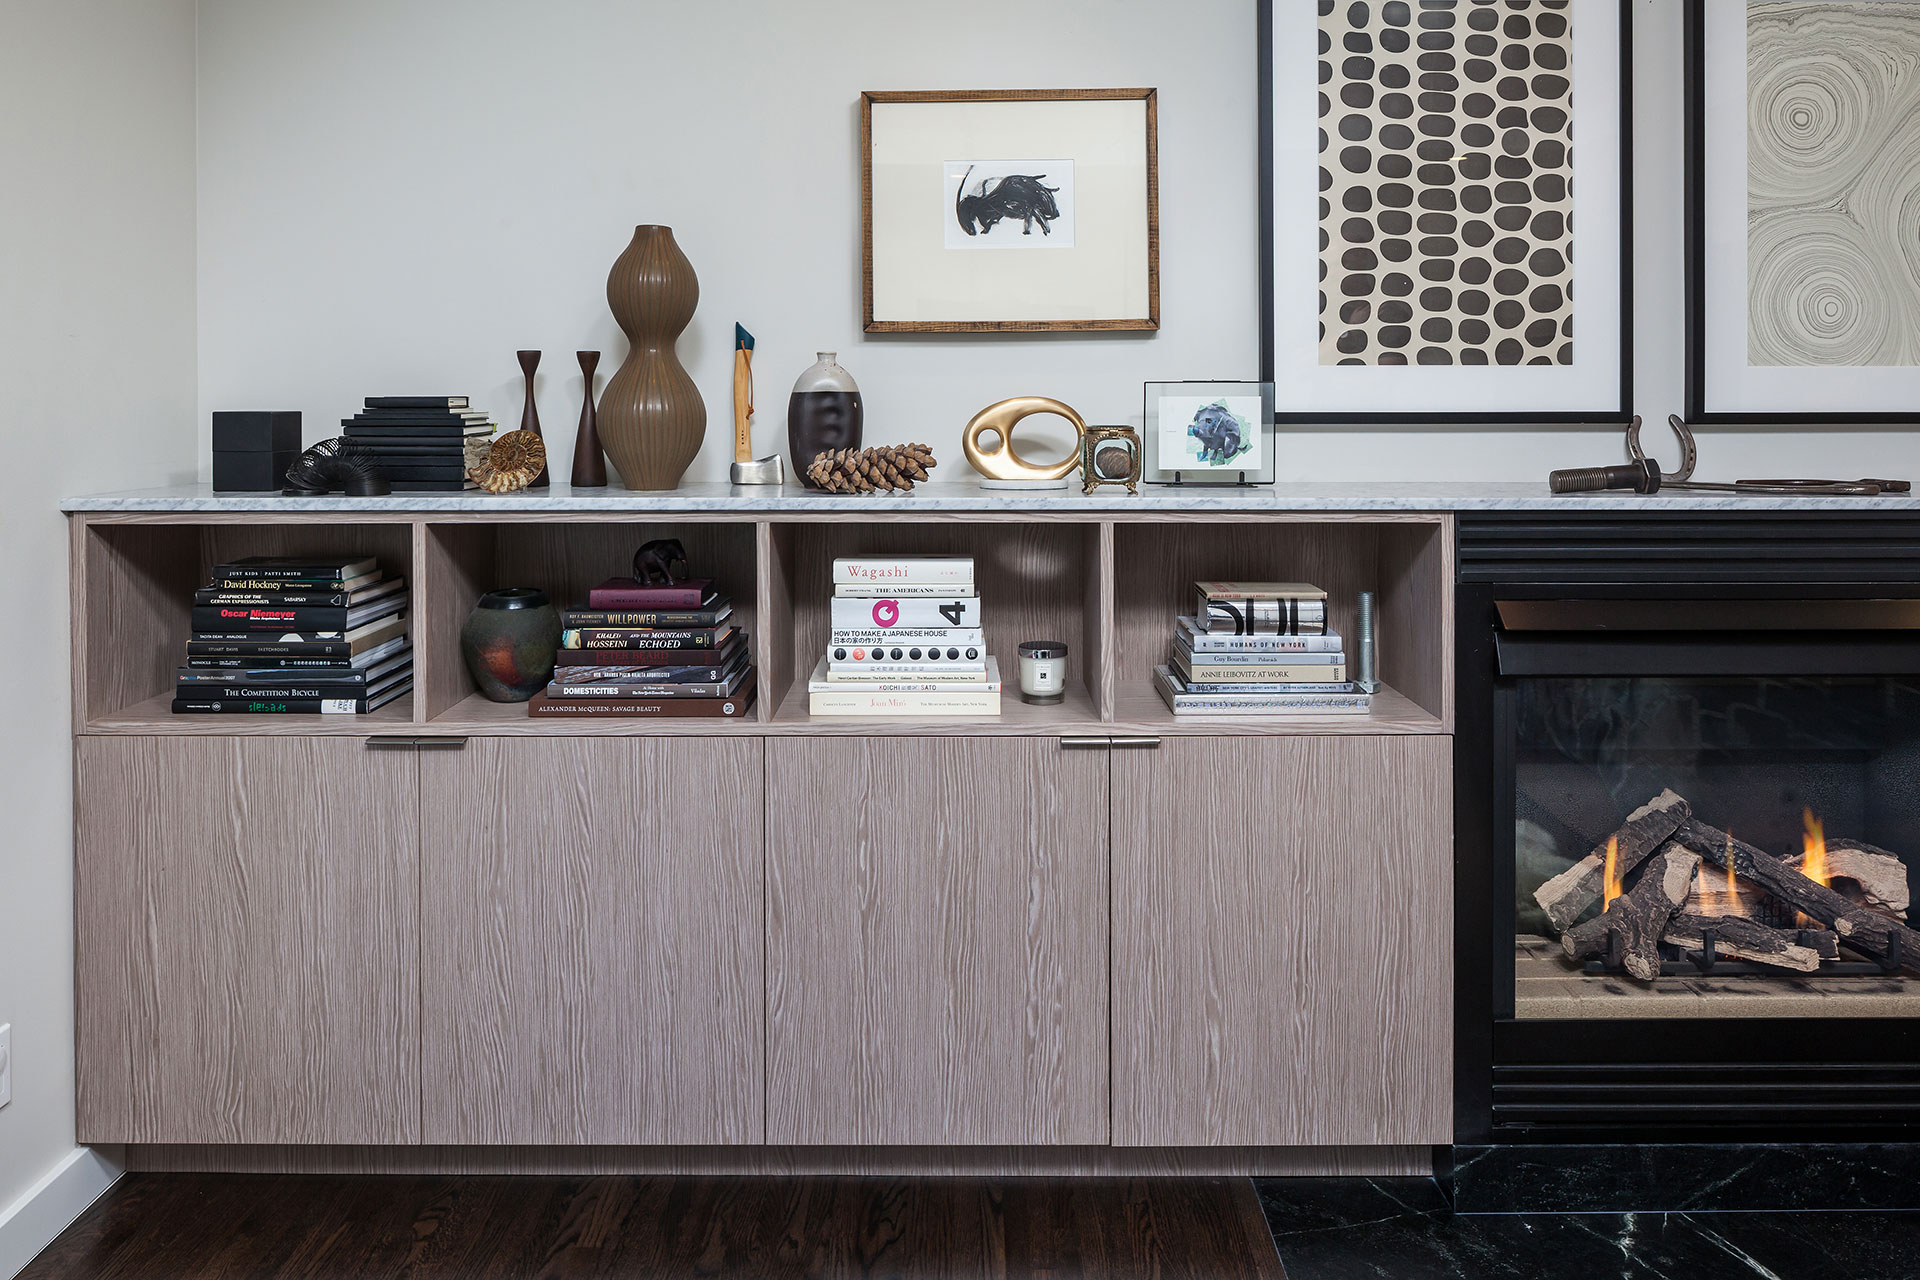 White oak cabinetry surrounds a gas fireplace in this mid-century modern remodel.